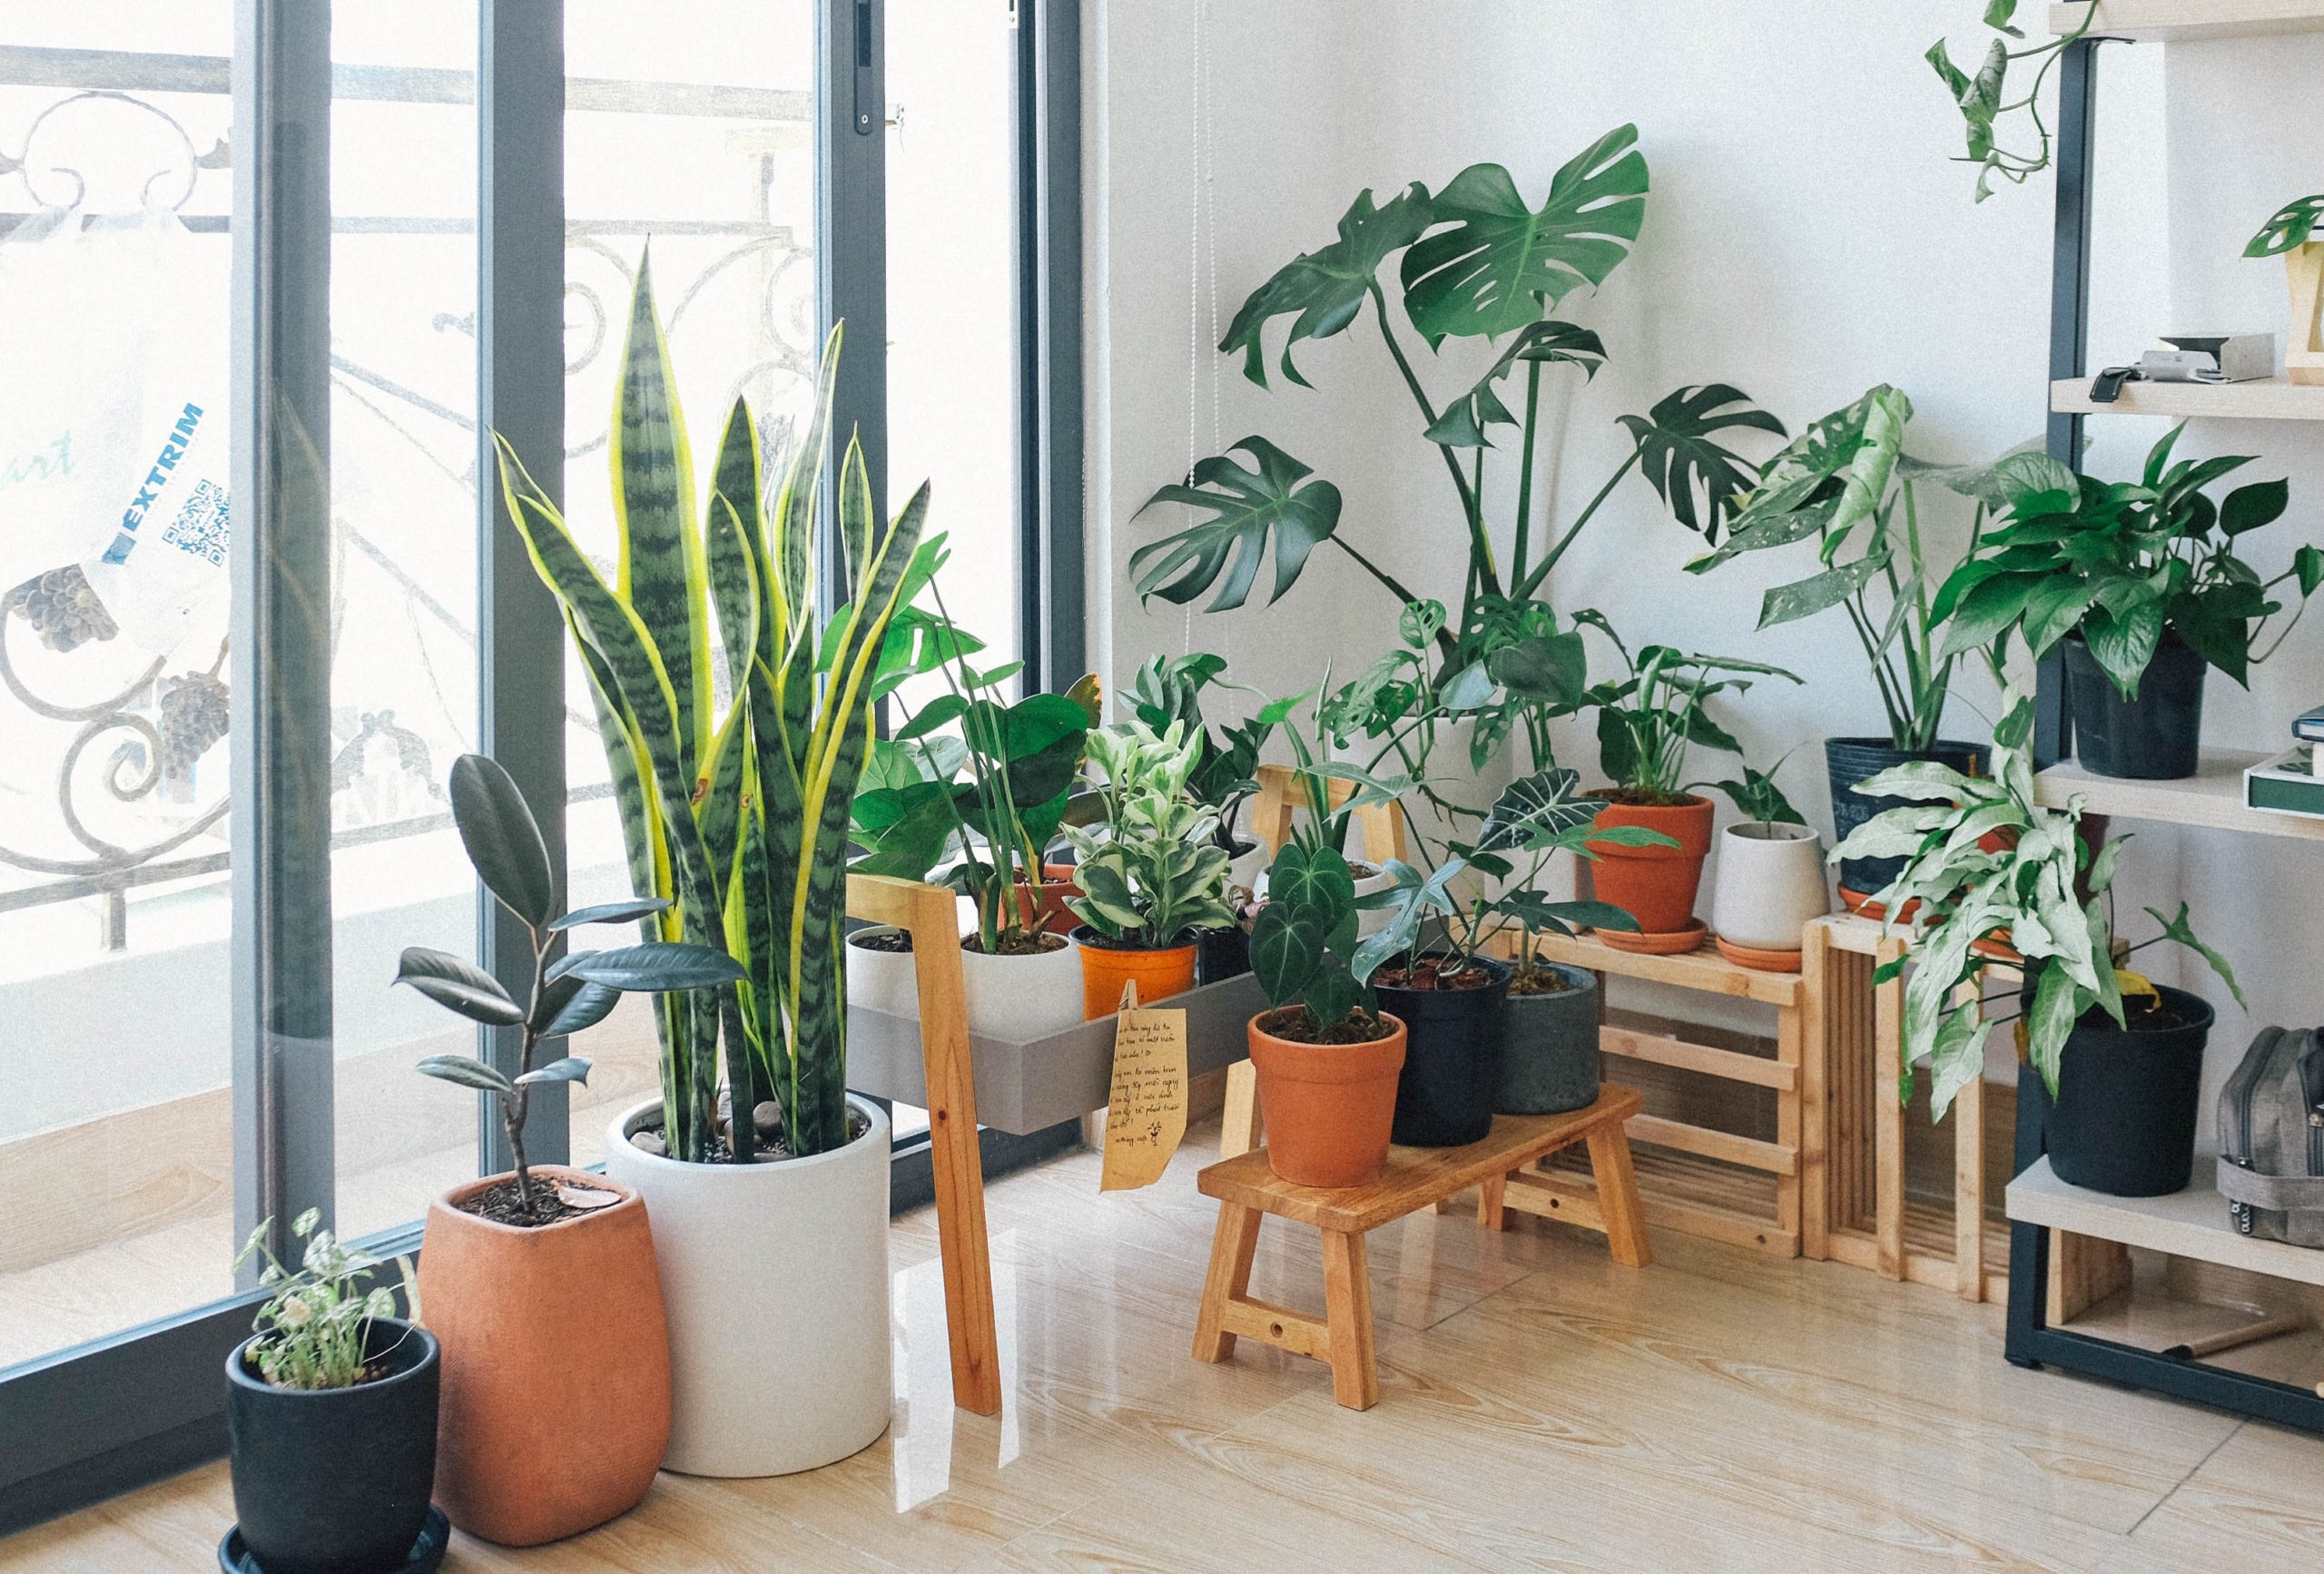 Decorative Plants to Introduce a Lush Green Touch to Your Home Decor